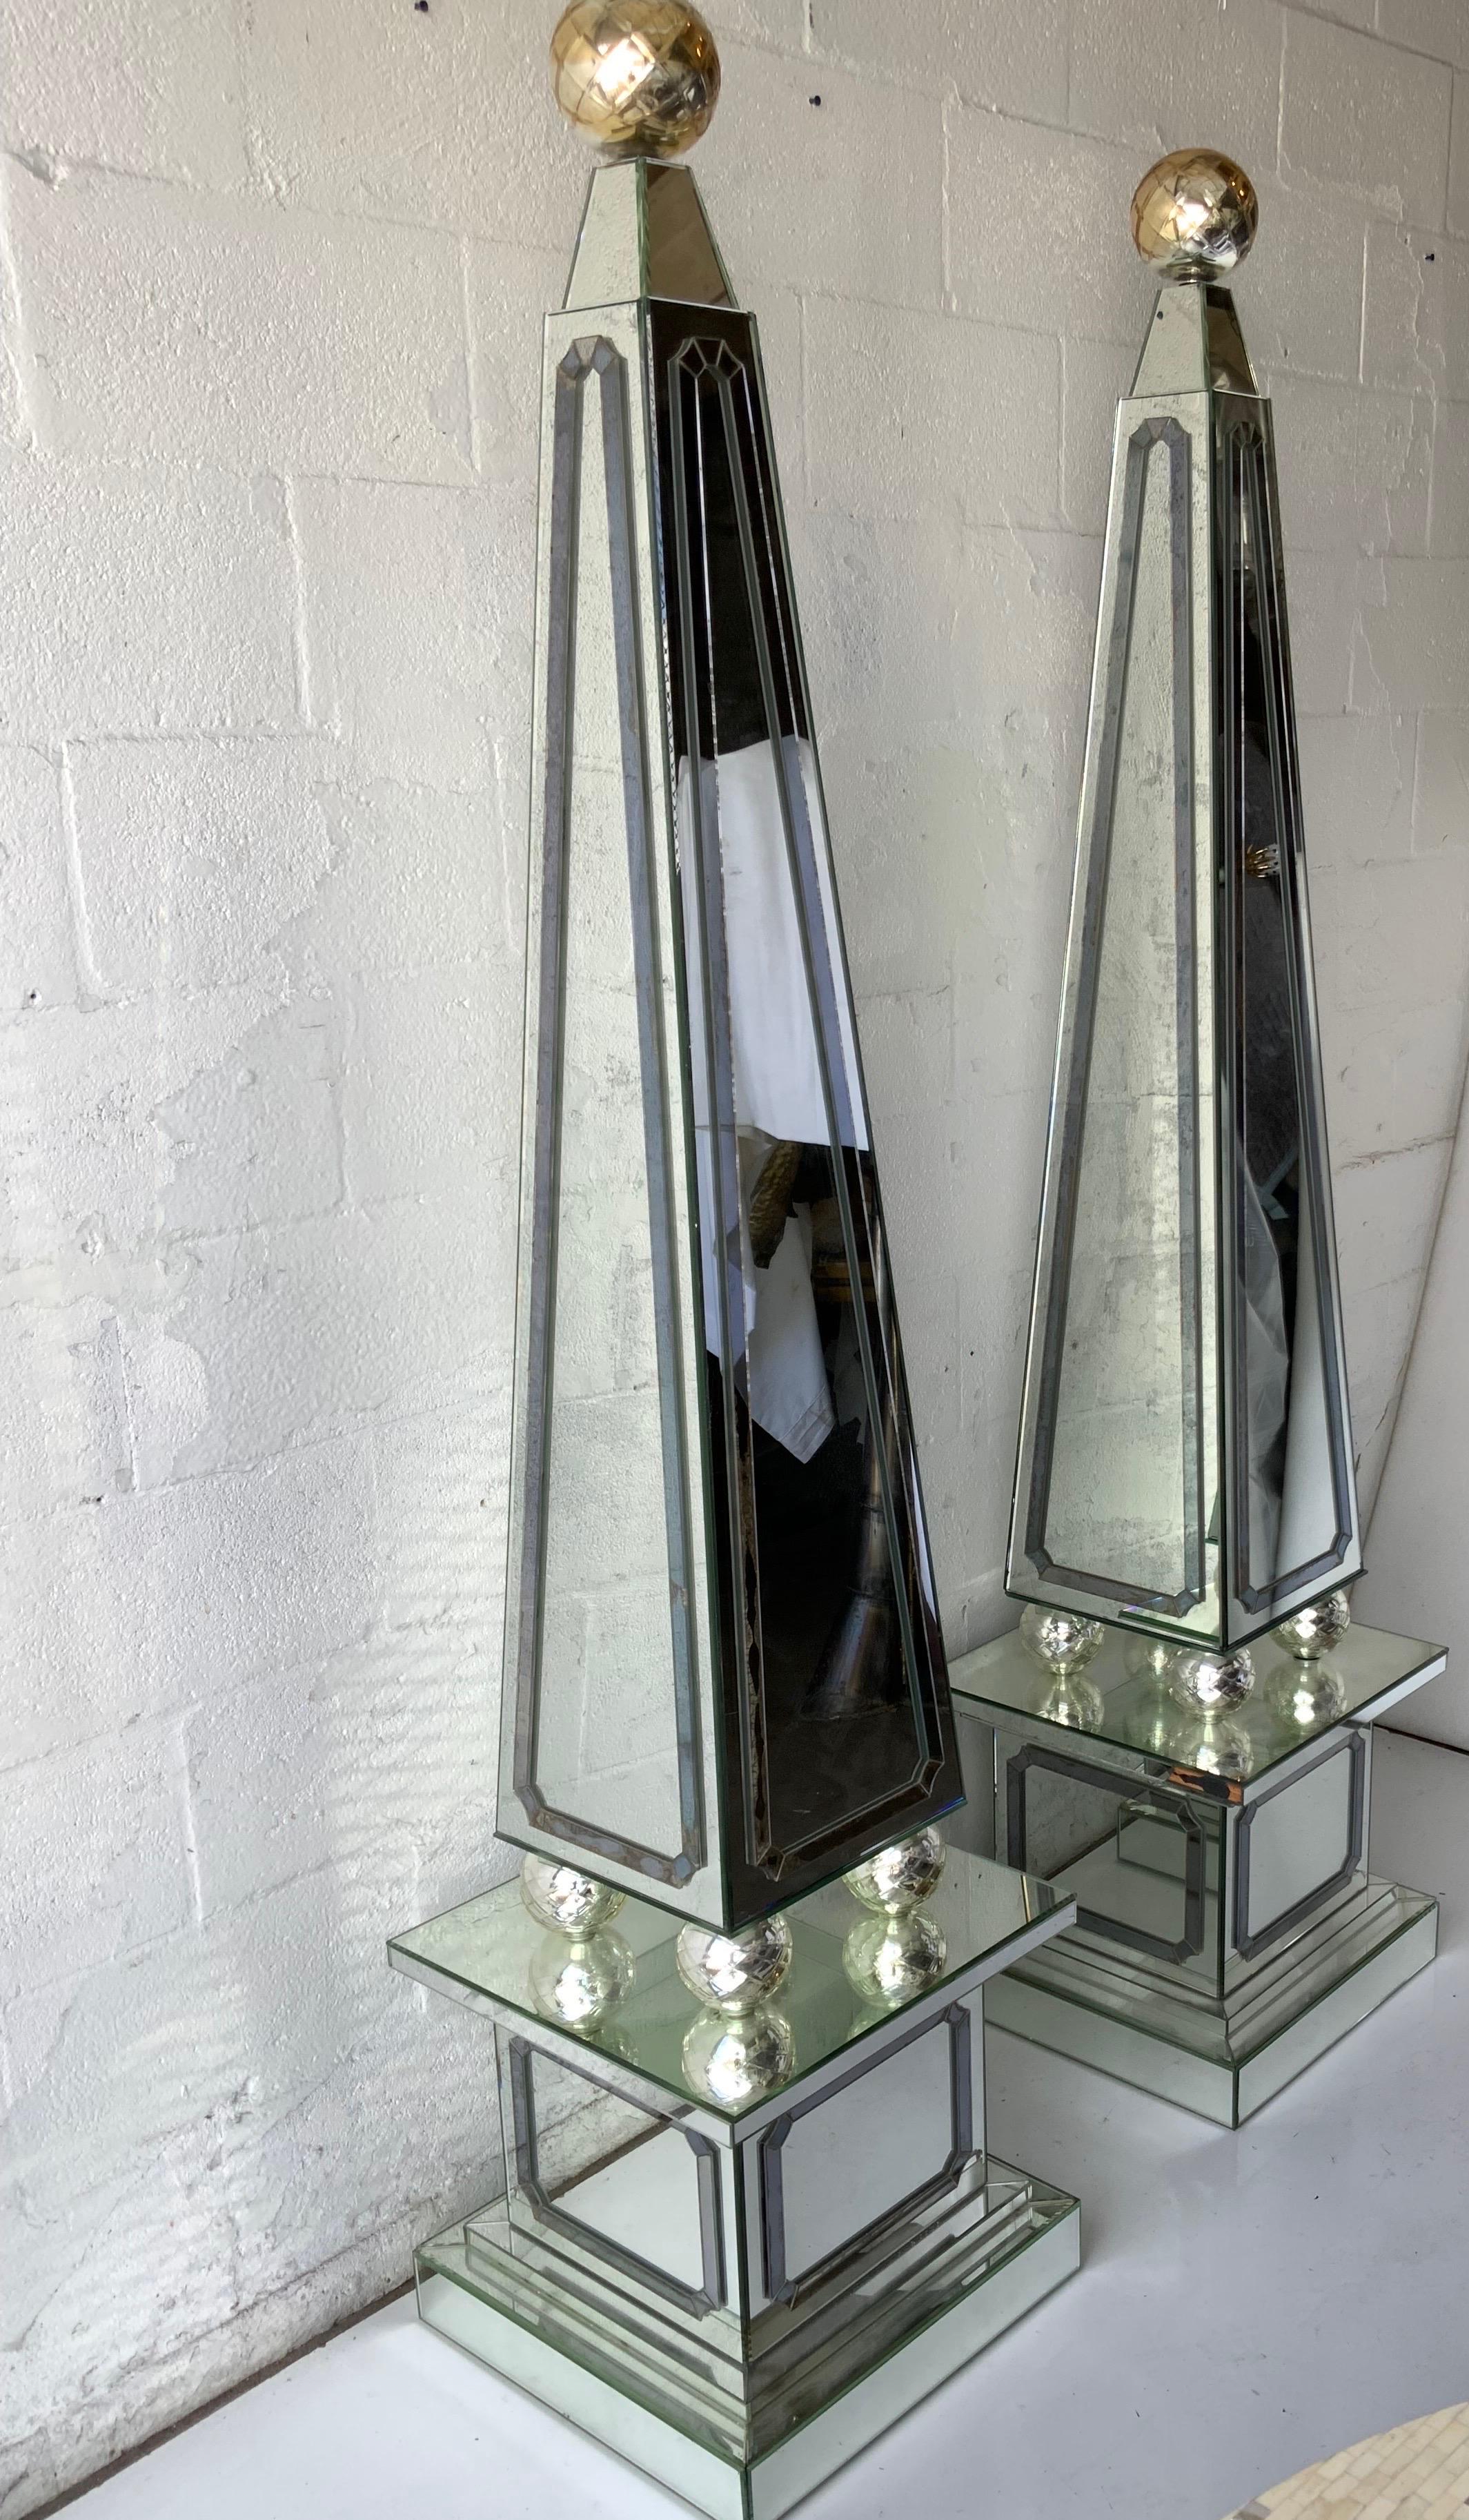 Spectacular pair of huge mirrored obelisks, 2 tone mirror, normal and distressed.